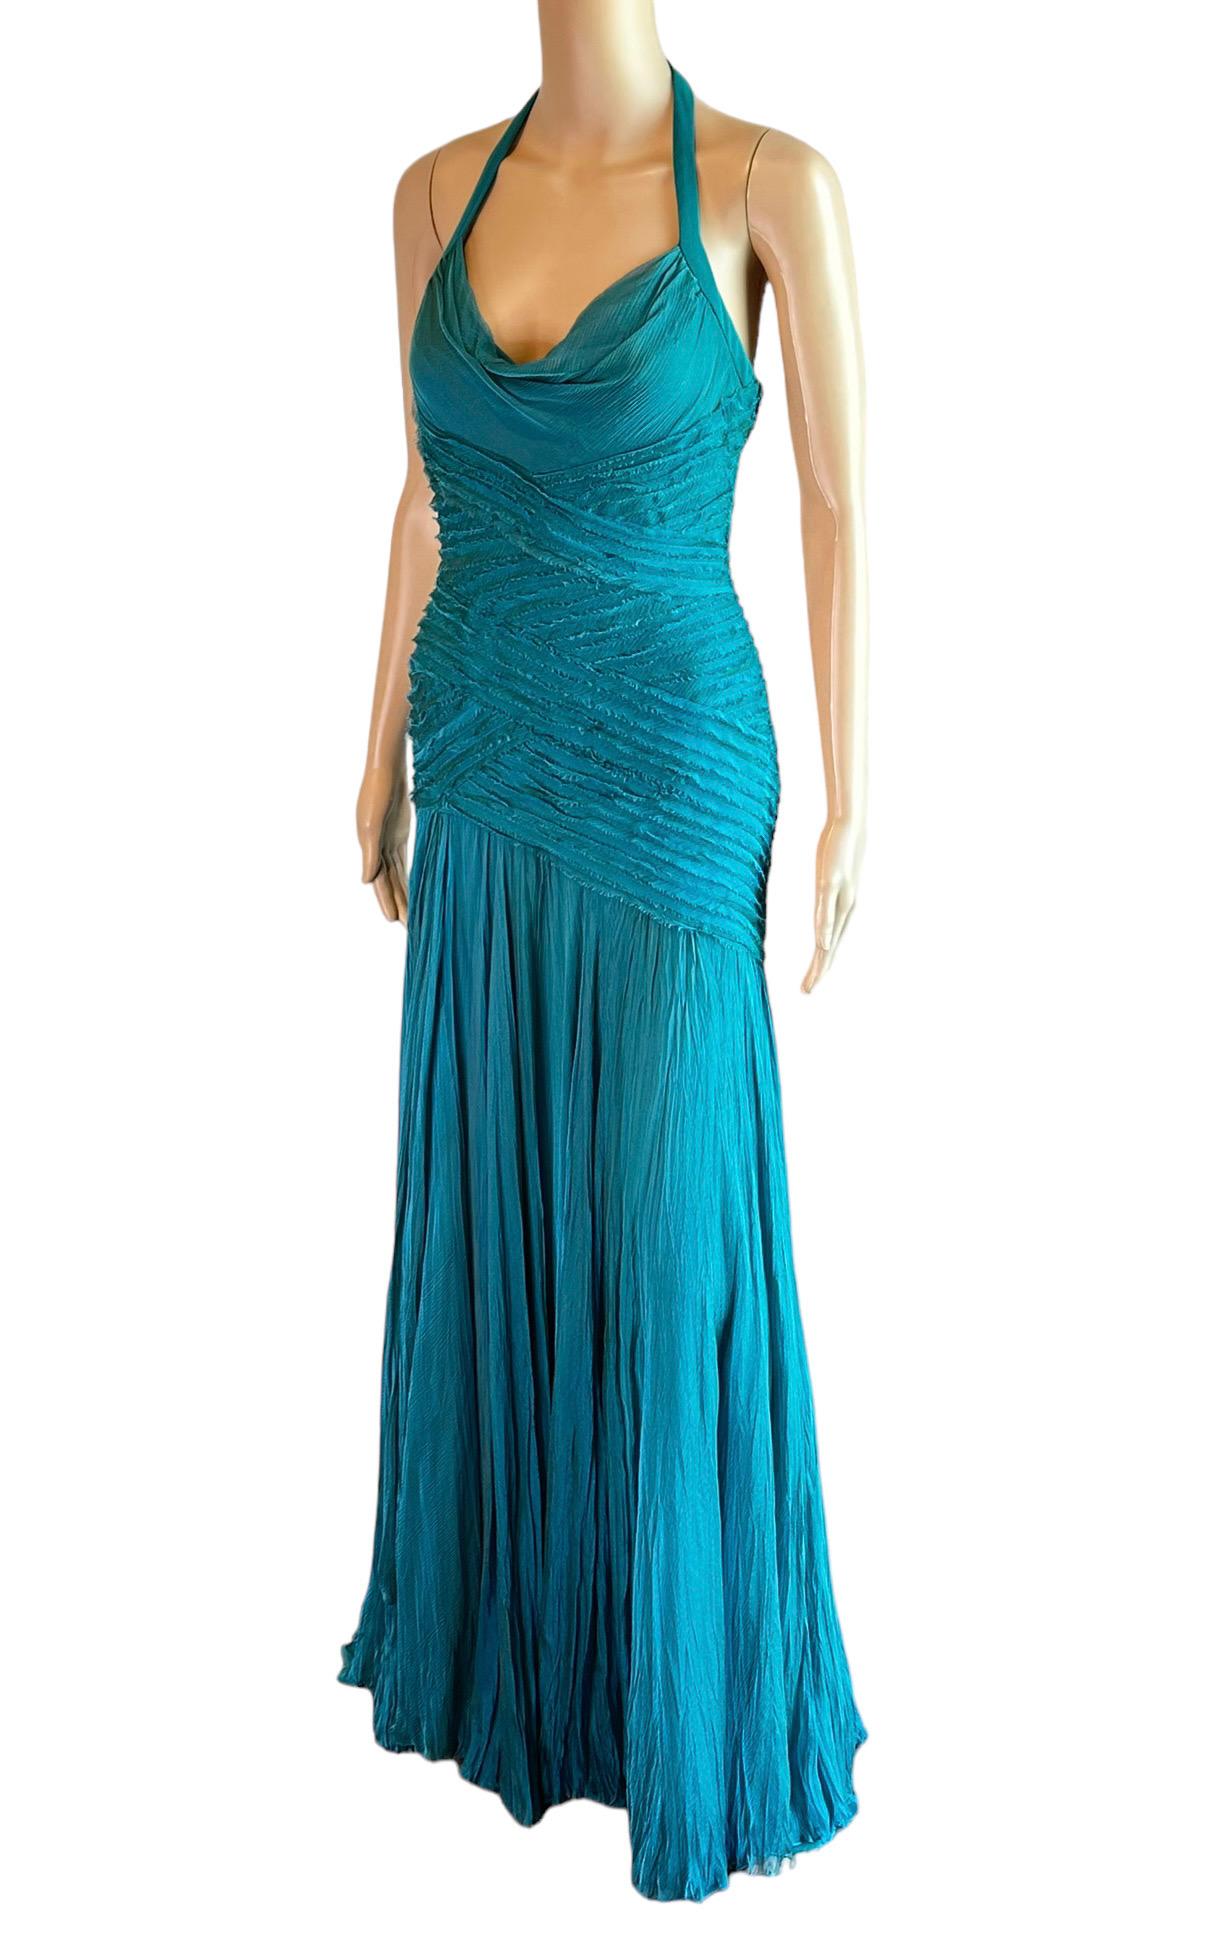 Versace F/W 2005 Runway Campaign Halter High Slit Slip Evening Dress Gown  In Good Condition For Sale In Naples, FL